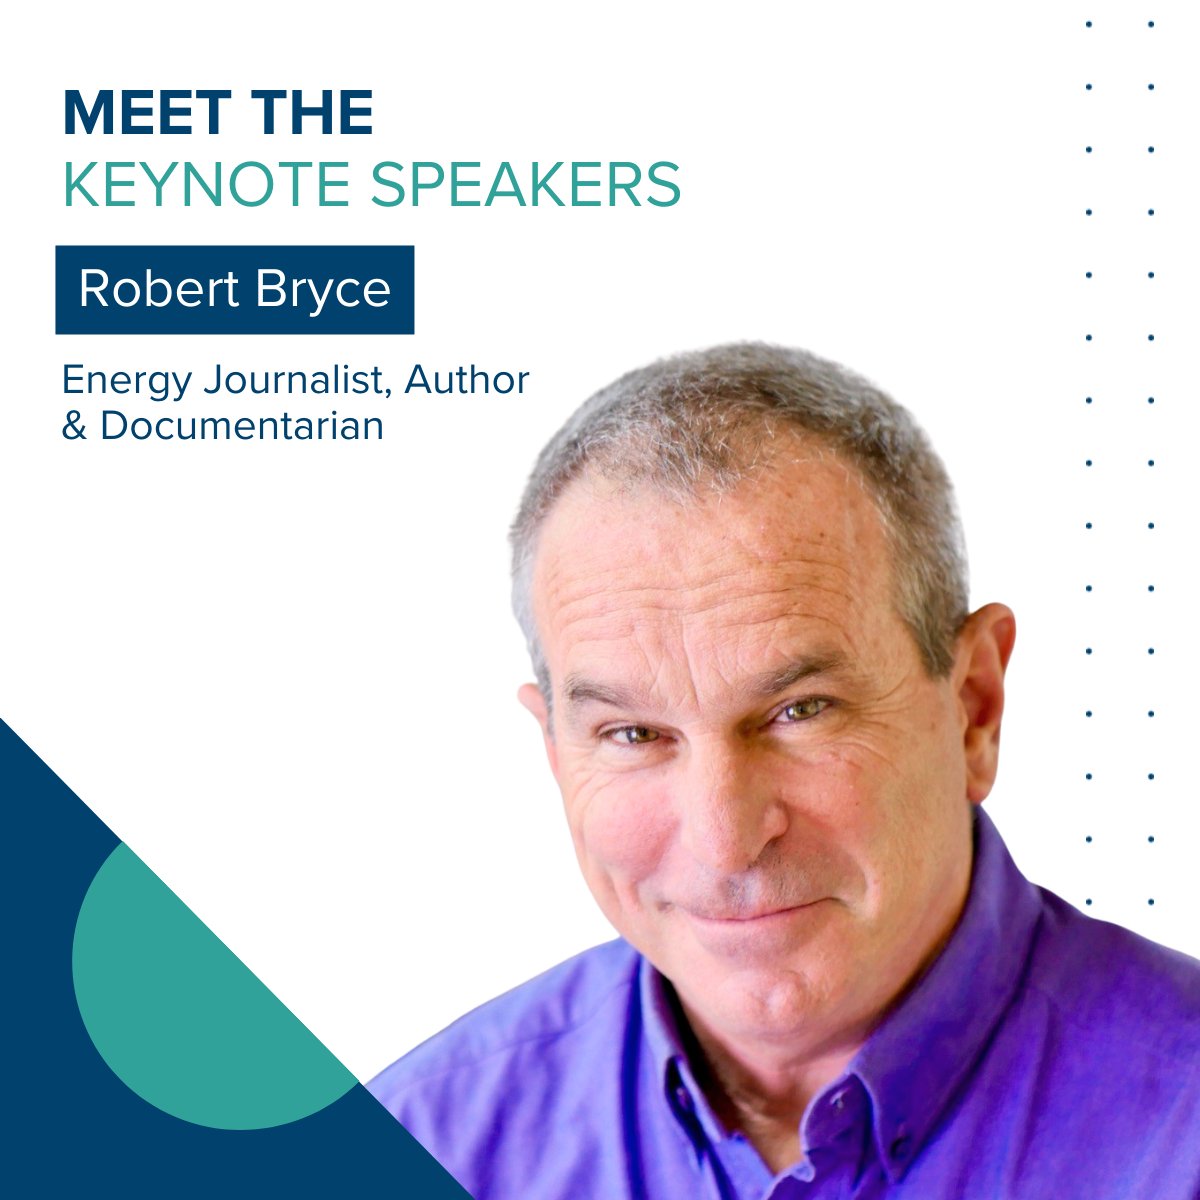 Meet the keynote speakers of #TVPPA's 78th Annual Conference! Learn what you can expect from our two distinguished and insightful keynotes, Robert Bryce (@pwrhungry) and Dr. Nick Bontis (@NickBontis). Read more here: bit.ly/43MYXcb